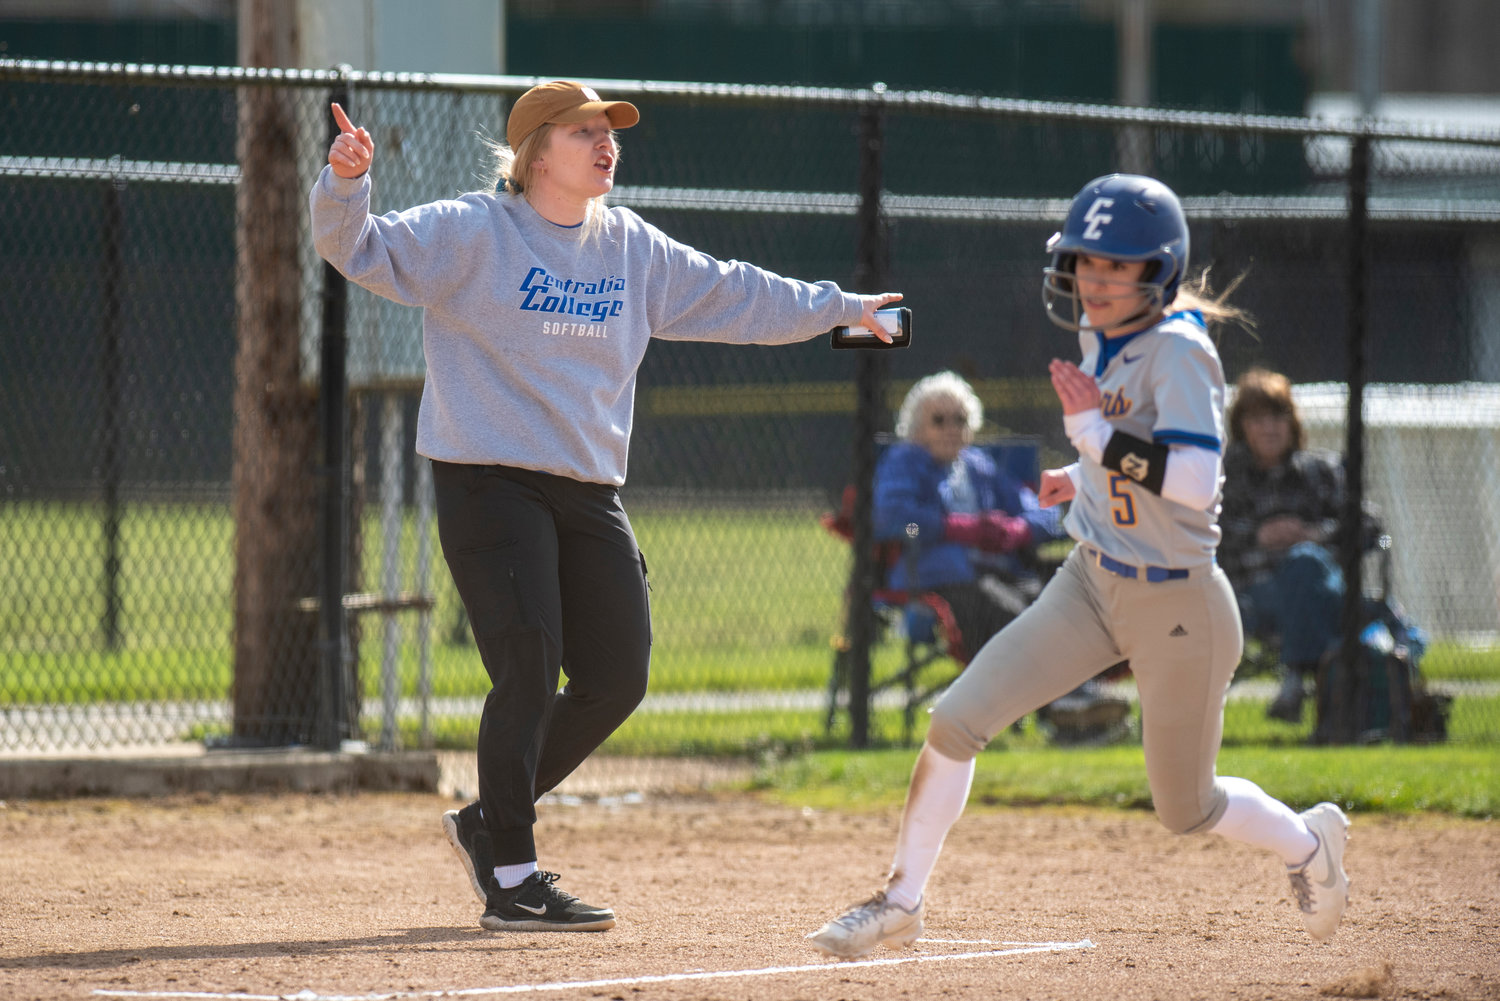 Centralia College softball coach Payton Pocklington waves Kylie Baker (5) home during a game against Chemeketa at home on March 25.